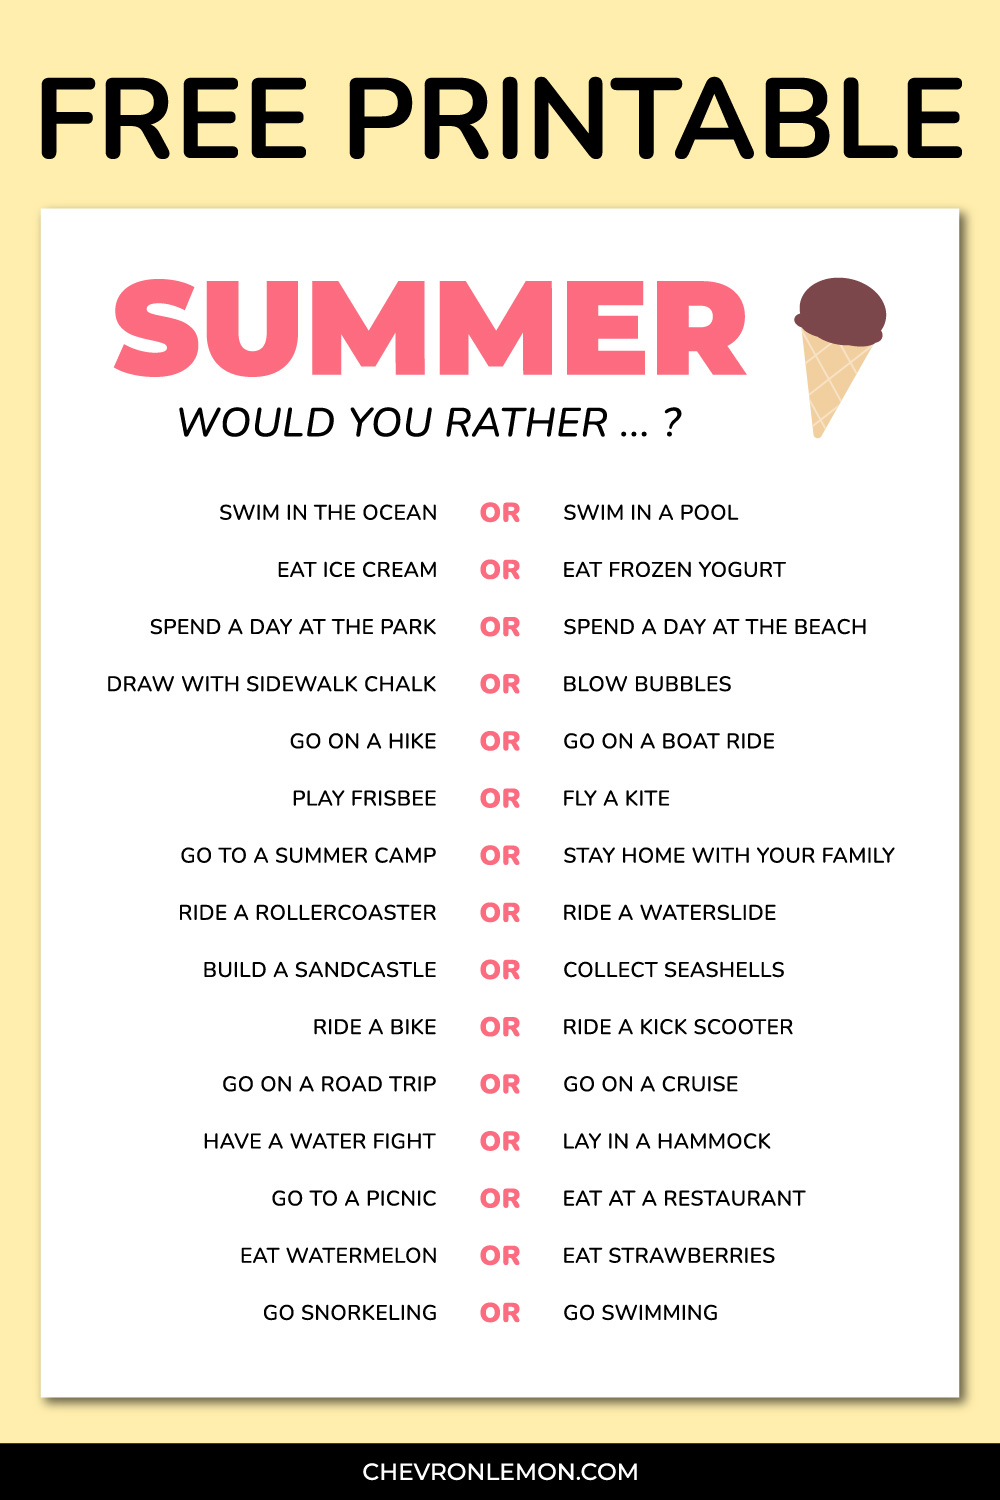 Free printable summer would you rather questions